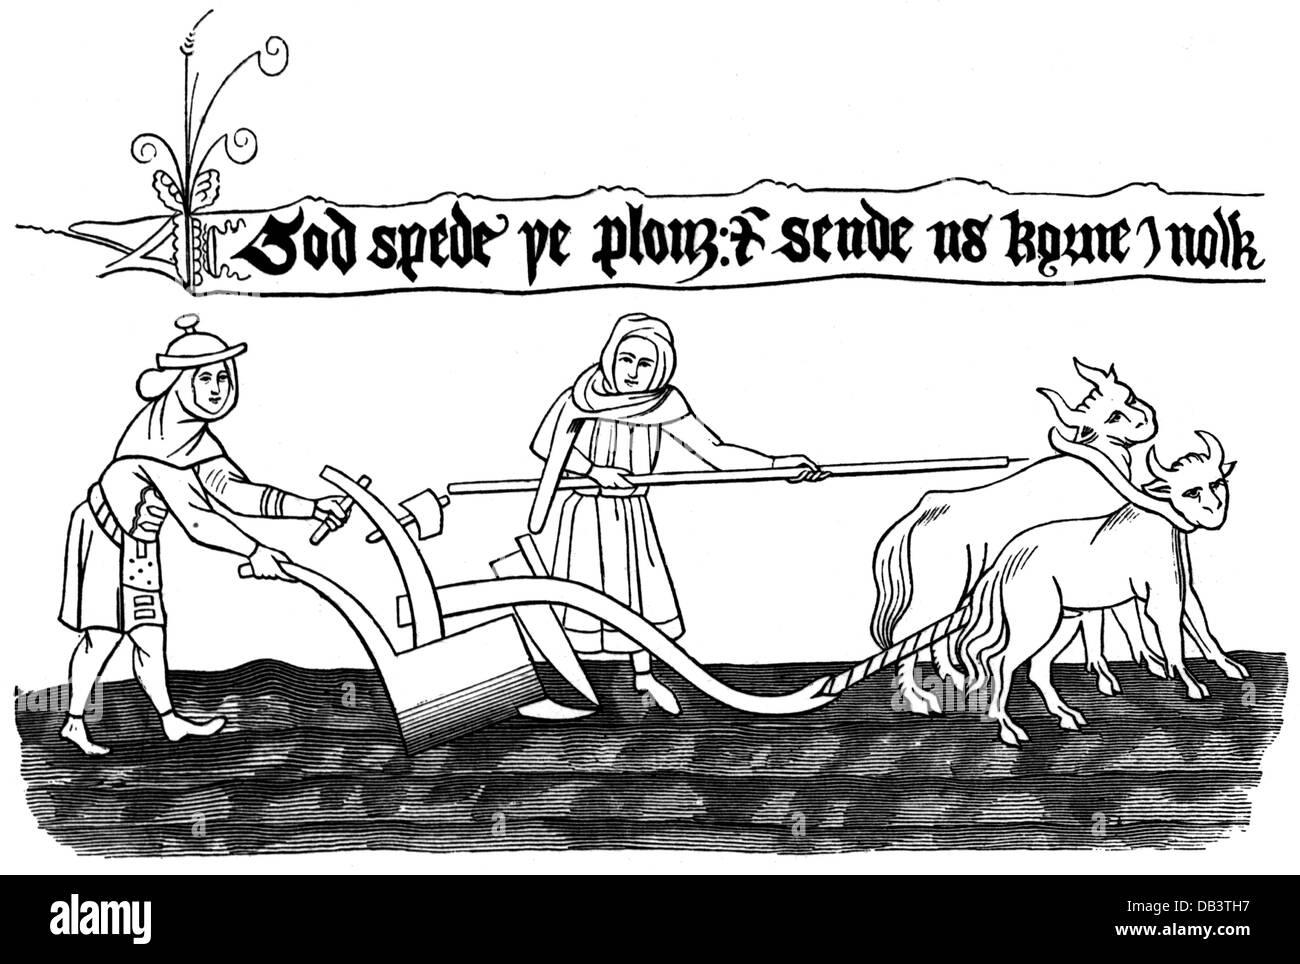 agriculture,agricultural work,plowing,farmer and farmer's wife on the field,Anglo-Saxon miniature,circa 11th century,wood engraving,19th century,Middle Ages,people,man,men,woman,women,ploughs,plows,animals,animal,ox,span of oxen,team of oxen,team,England,working,plough,plow,ploughing,plowing,Anglo-Saxon,Anglo-Saxons,script,scripts,old English,agriculture,farming,agricultural work,farm labour,farm labor,farmer,farmers,farmer's wife,countrywoman,countrywomen,field,fields,miniature,miniatures,historic,historical,med,Additional-Rights-Clearences-Not Available Stock Photo